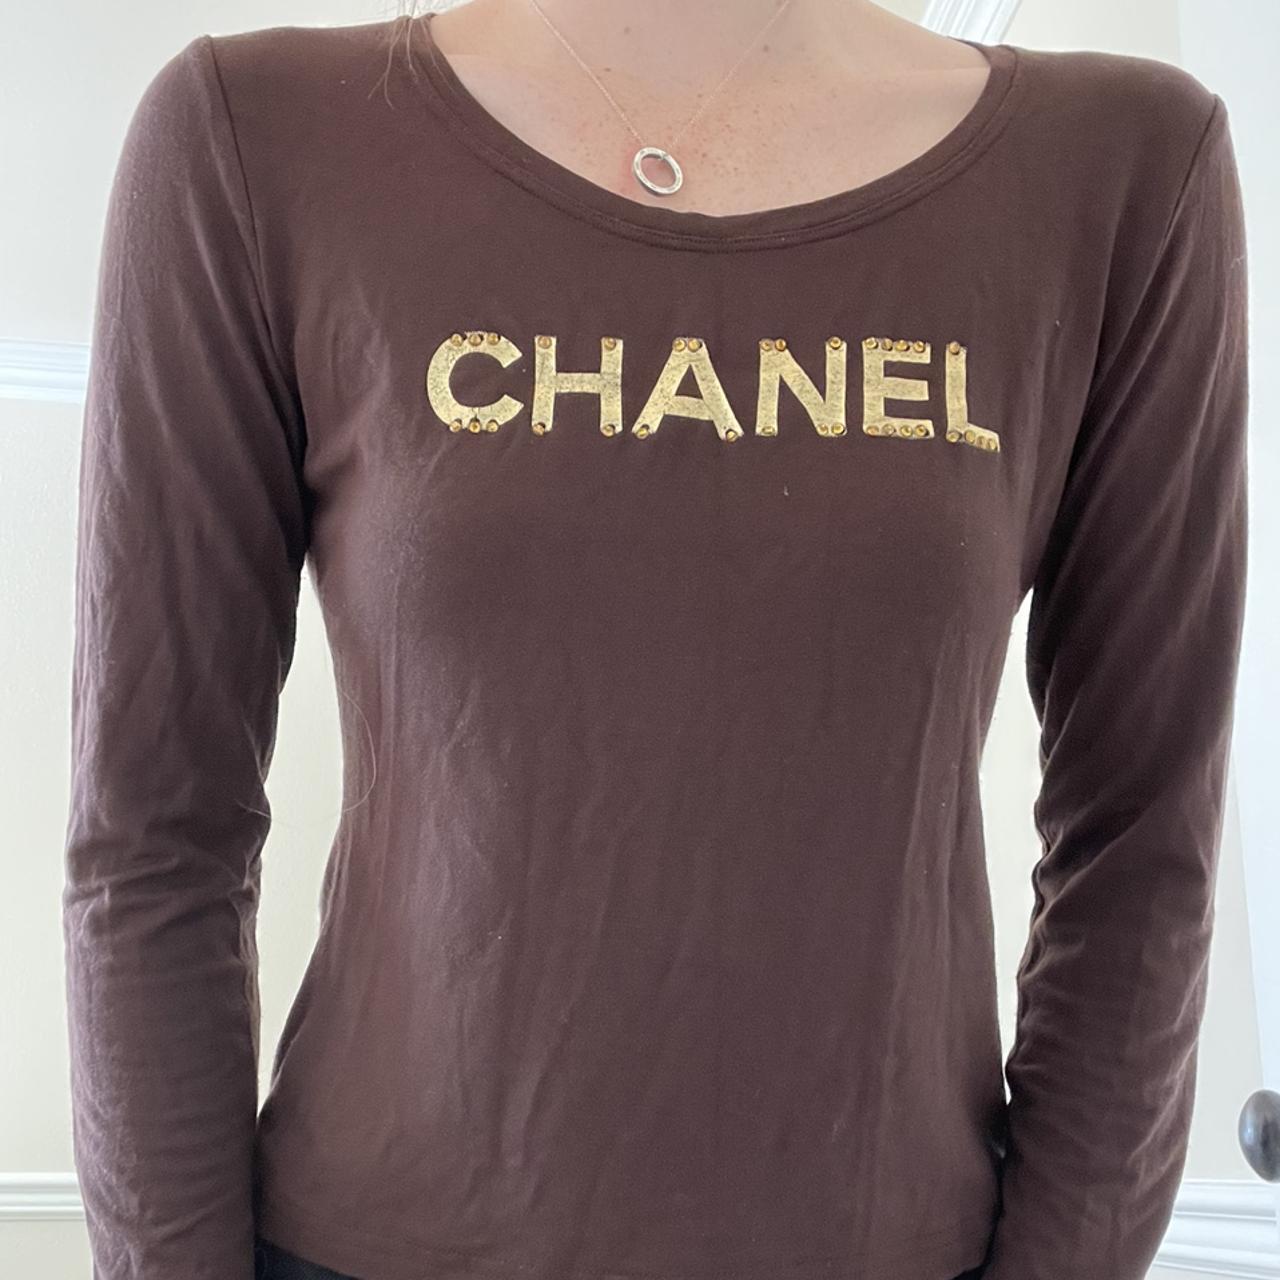 Authentic vintage Chanel brown long sleeve top with